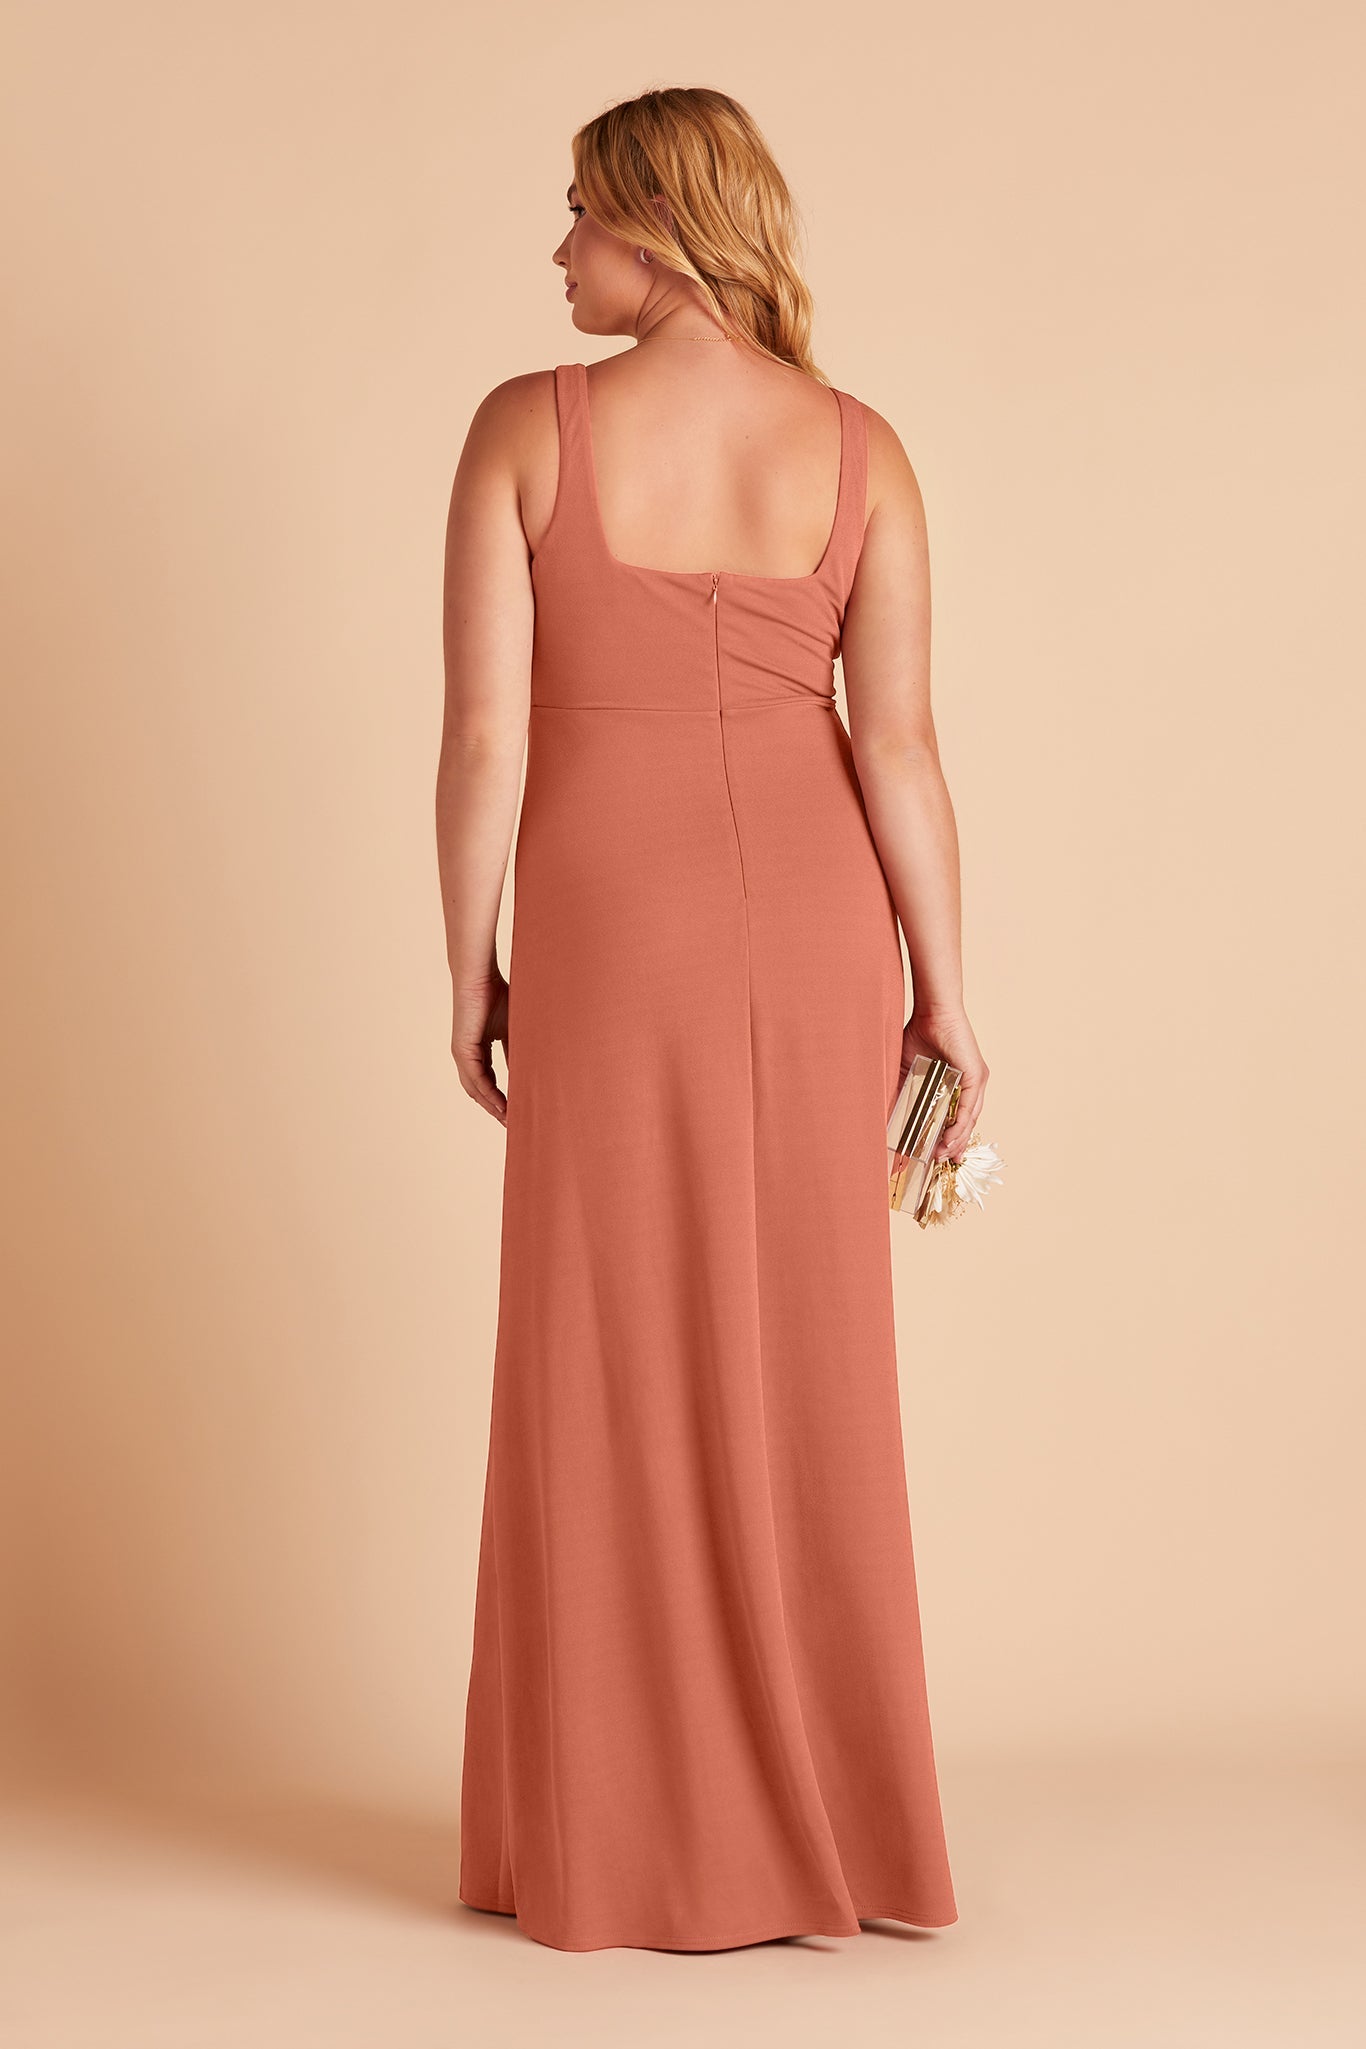 Alex plus size convertible bridesmaid dress with slit in terracotta crepe by Birdy Grey, back view